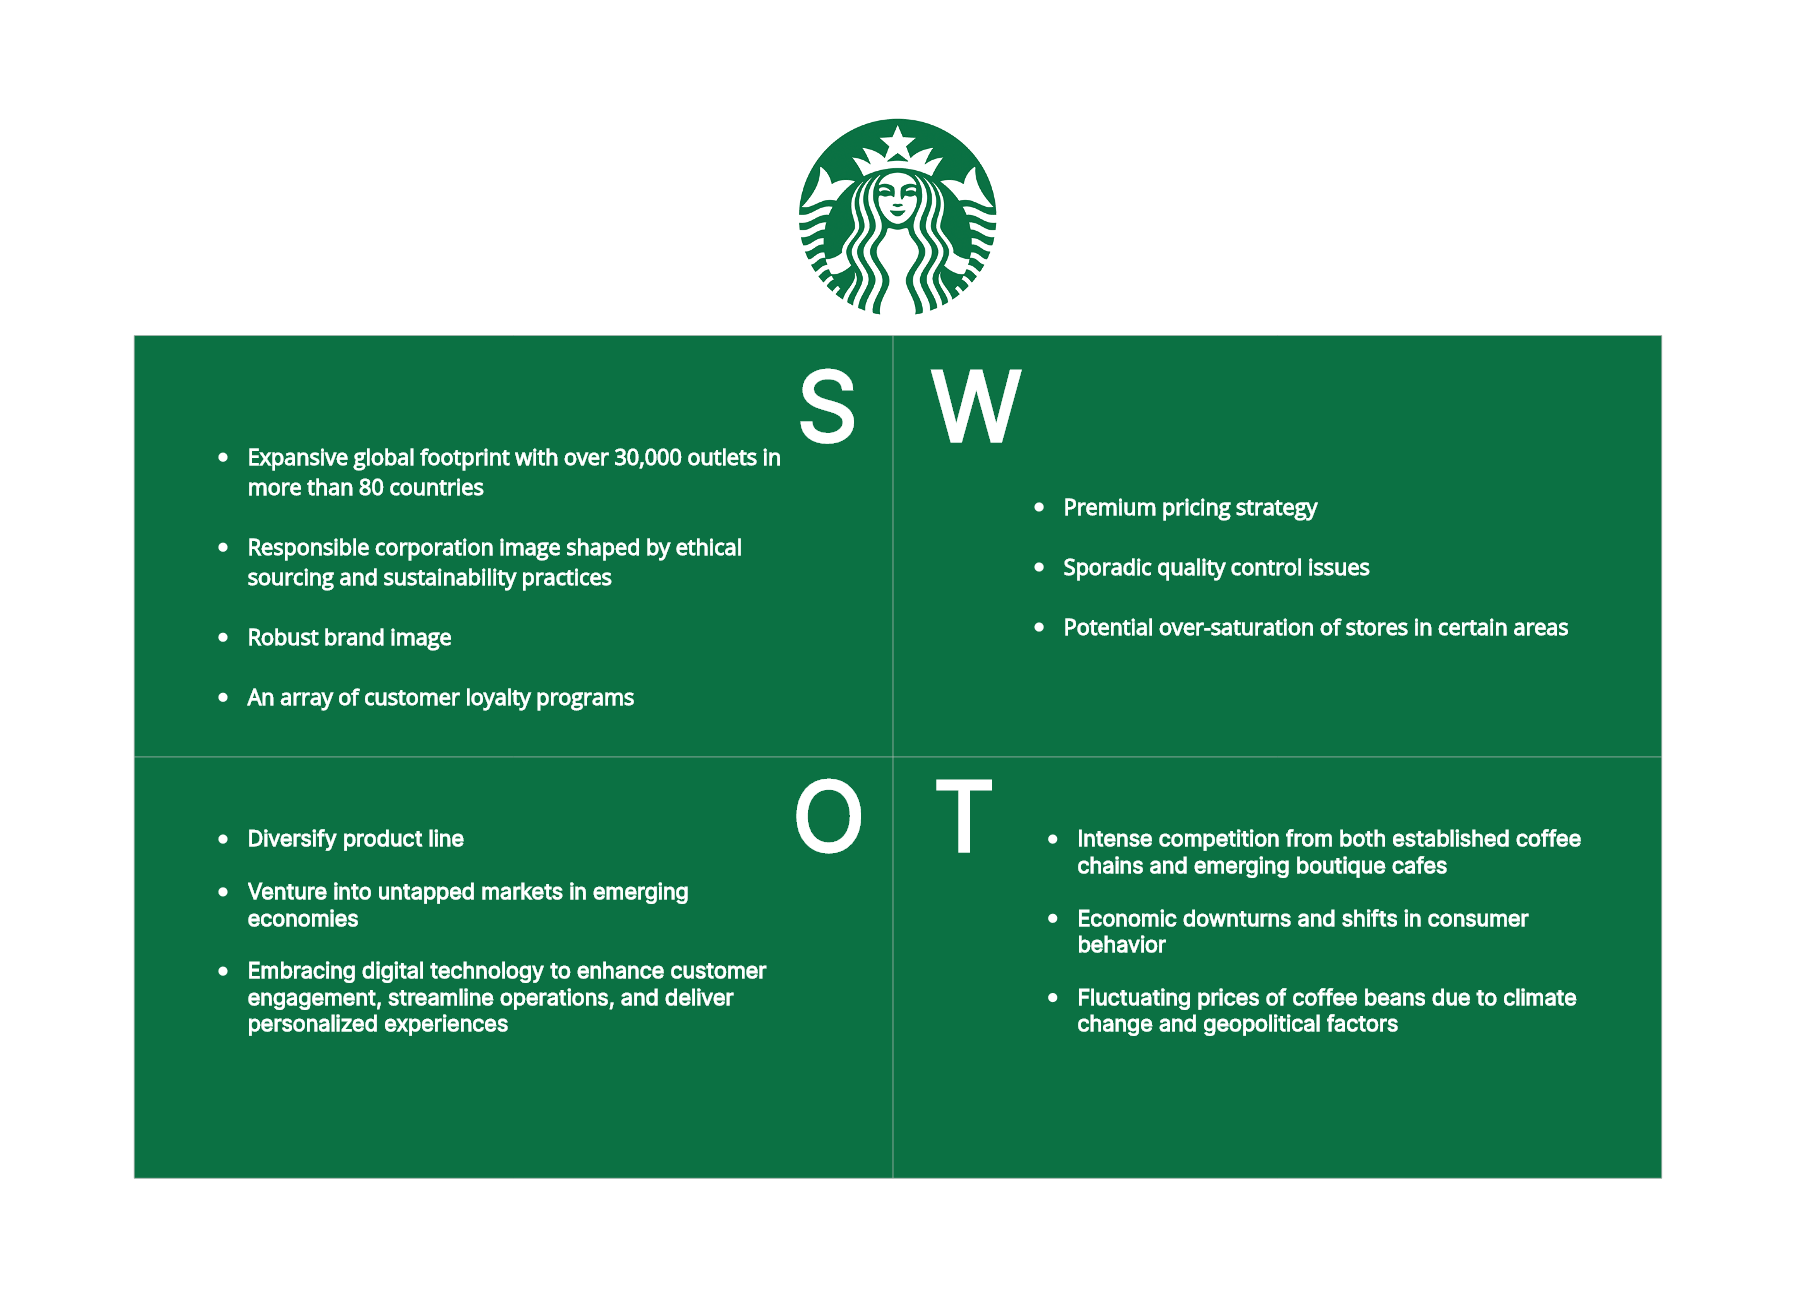 Starbucks SWOT Analysis Brewing Success in a World of Beans